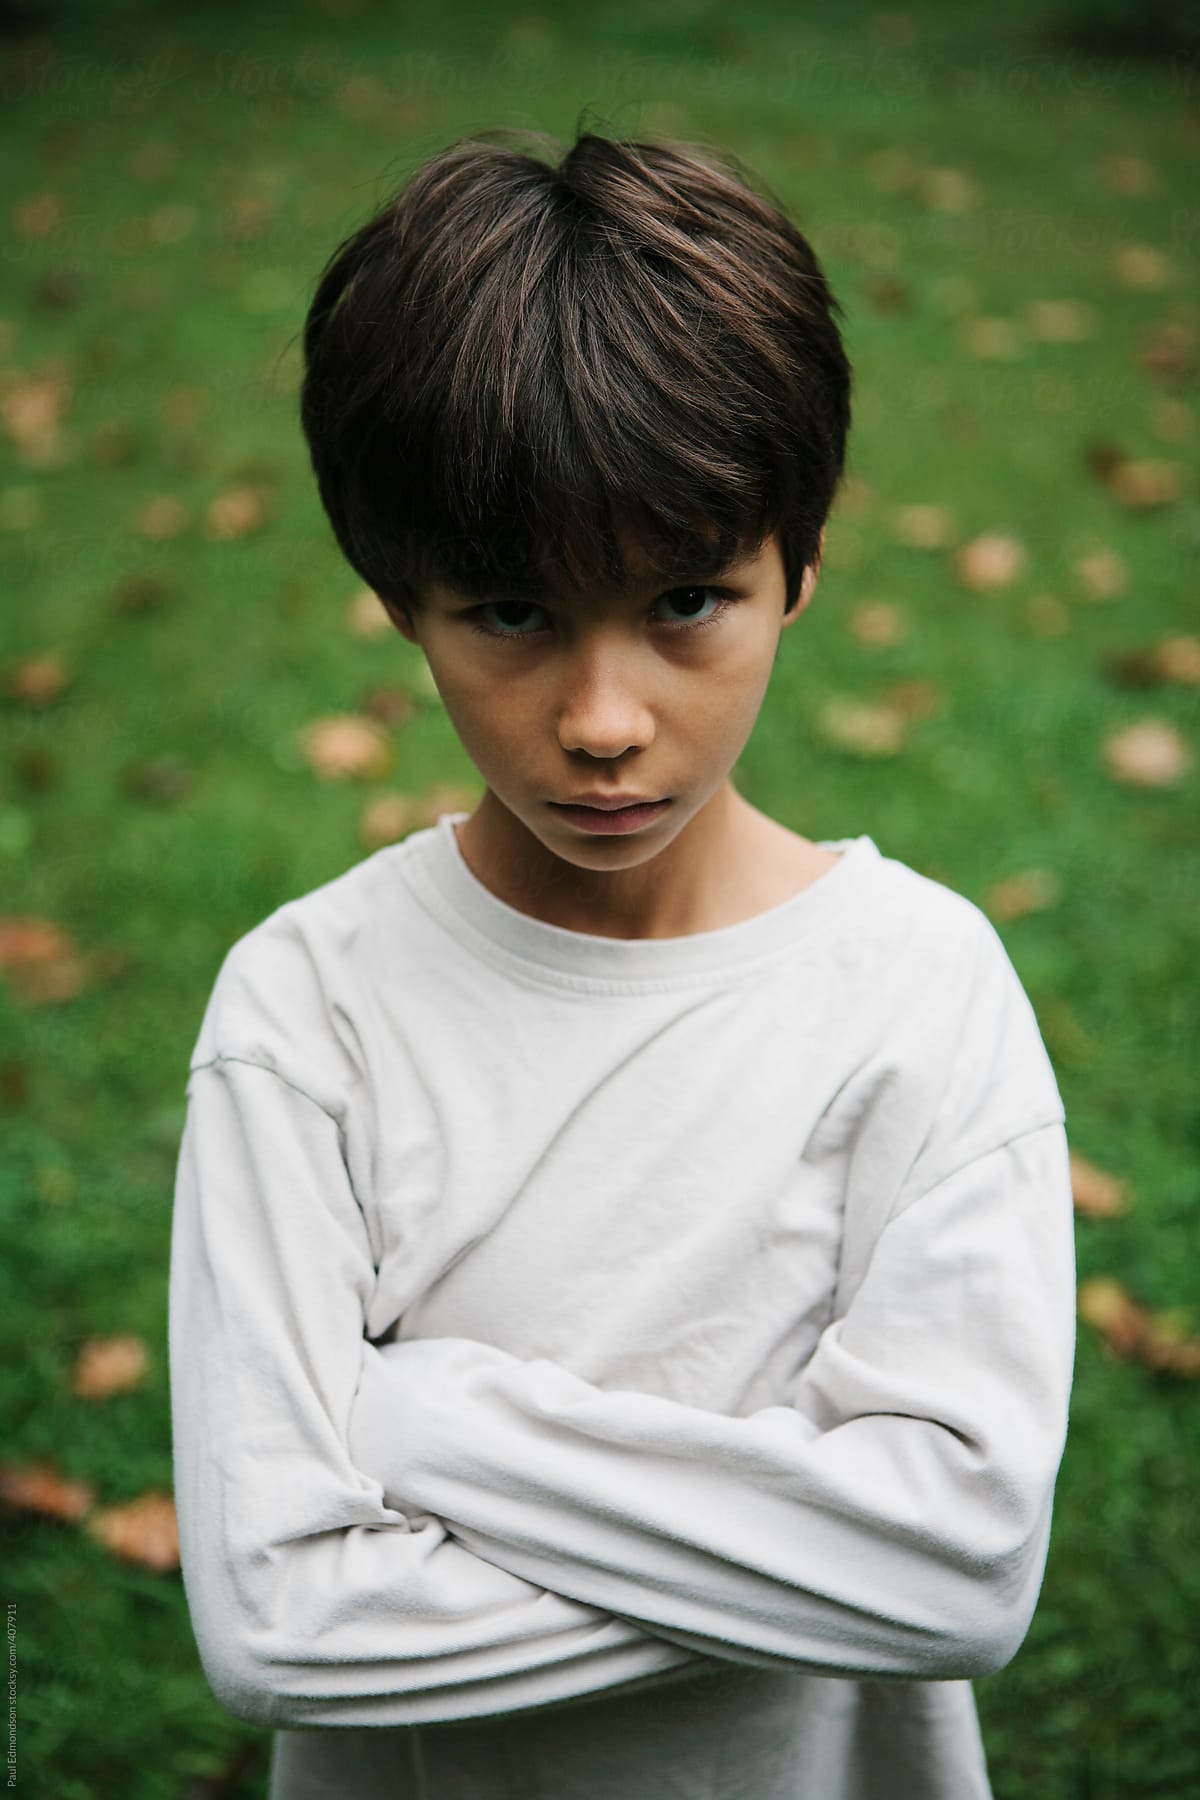 Portrait of serious nine year old boy